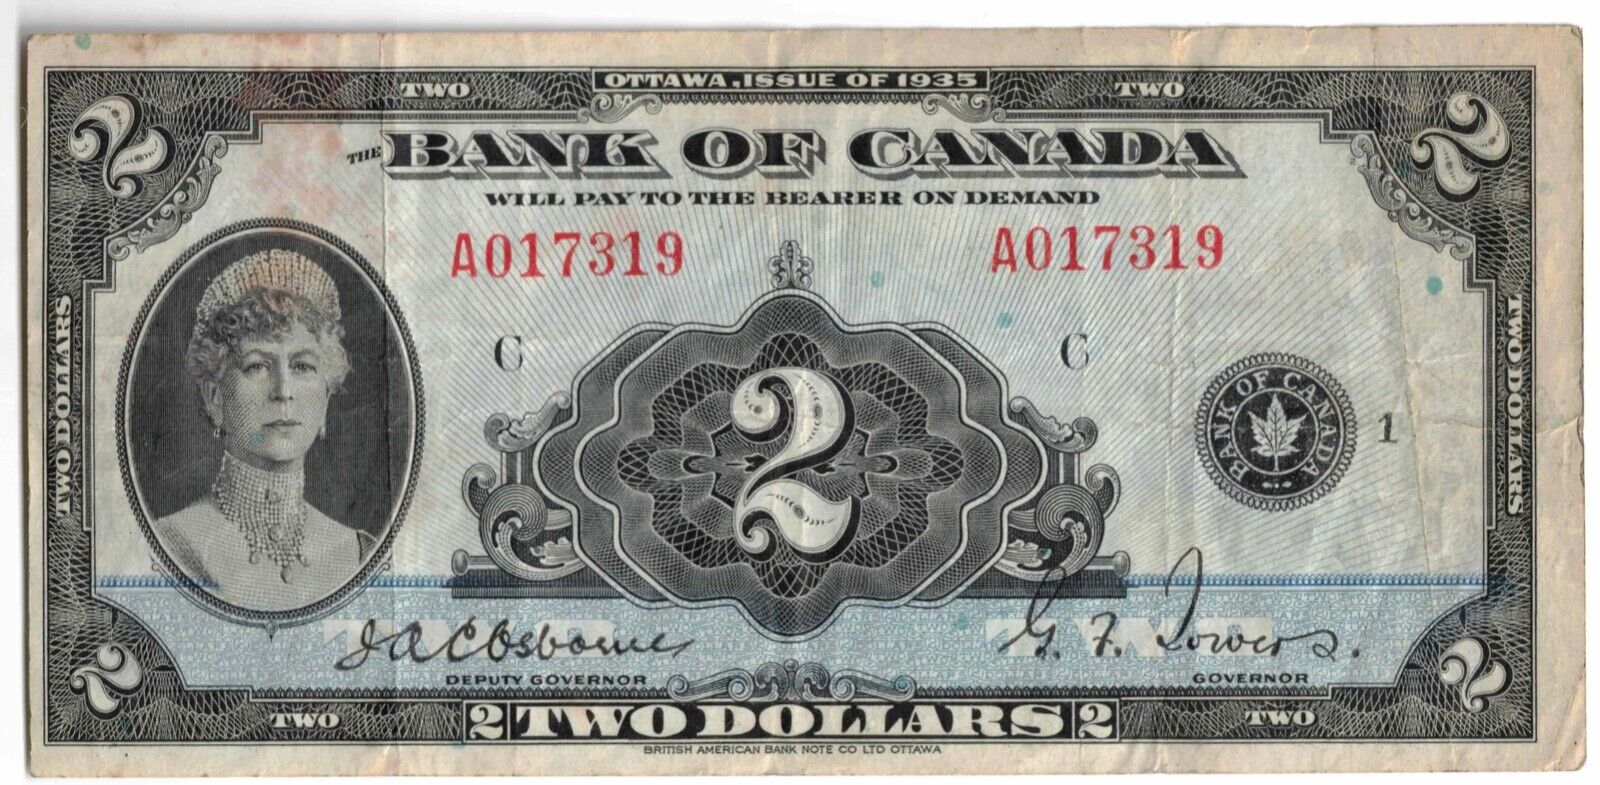 $2 1935 Bank Of Canada Note Osborne-towers Series A Bc-3 - Vf Light Staining